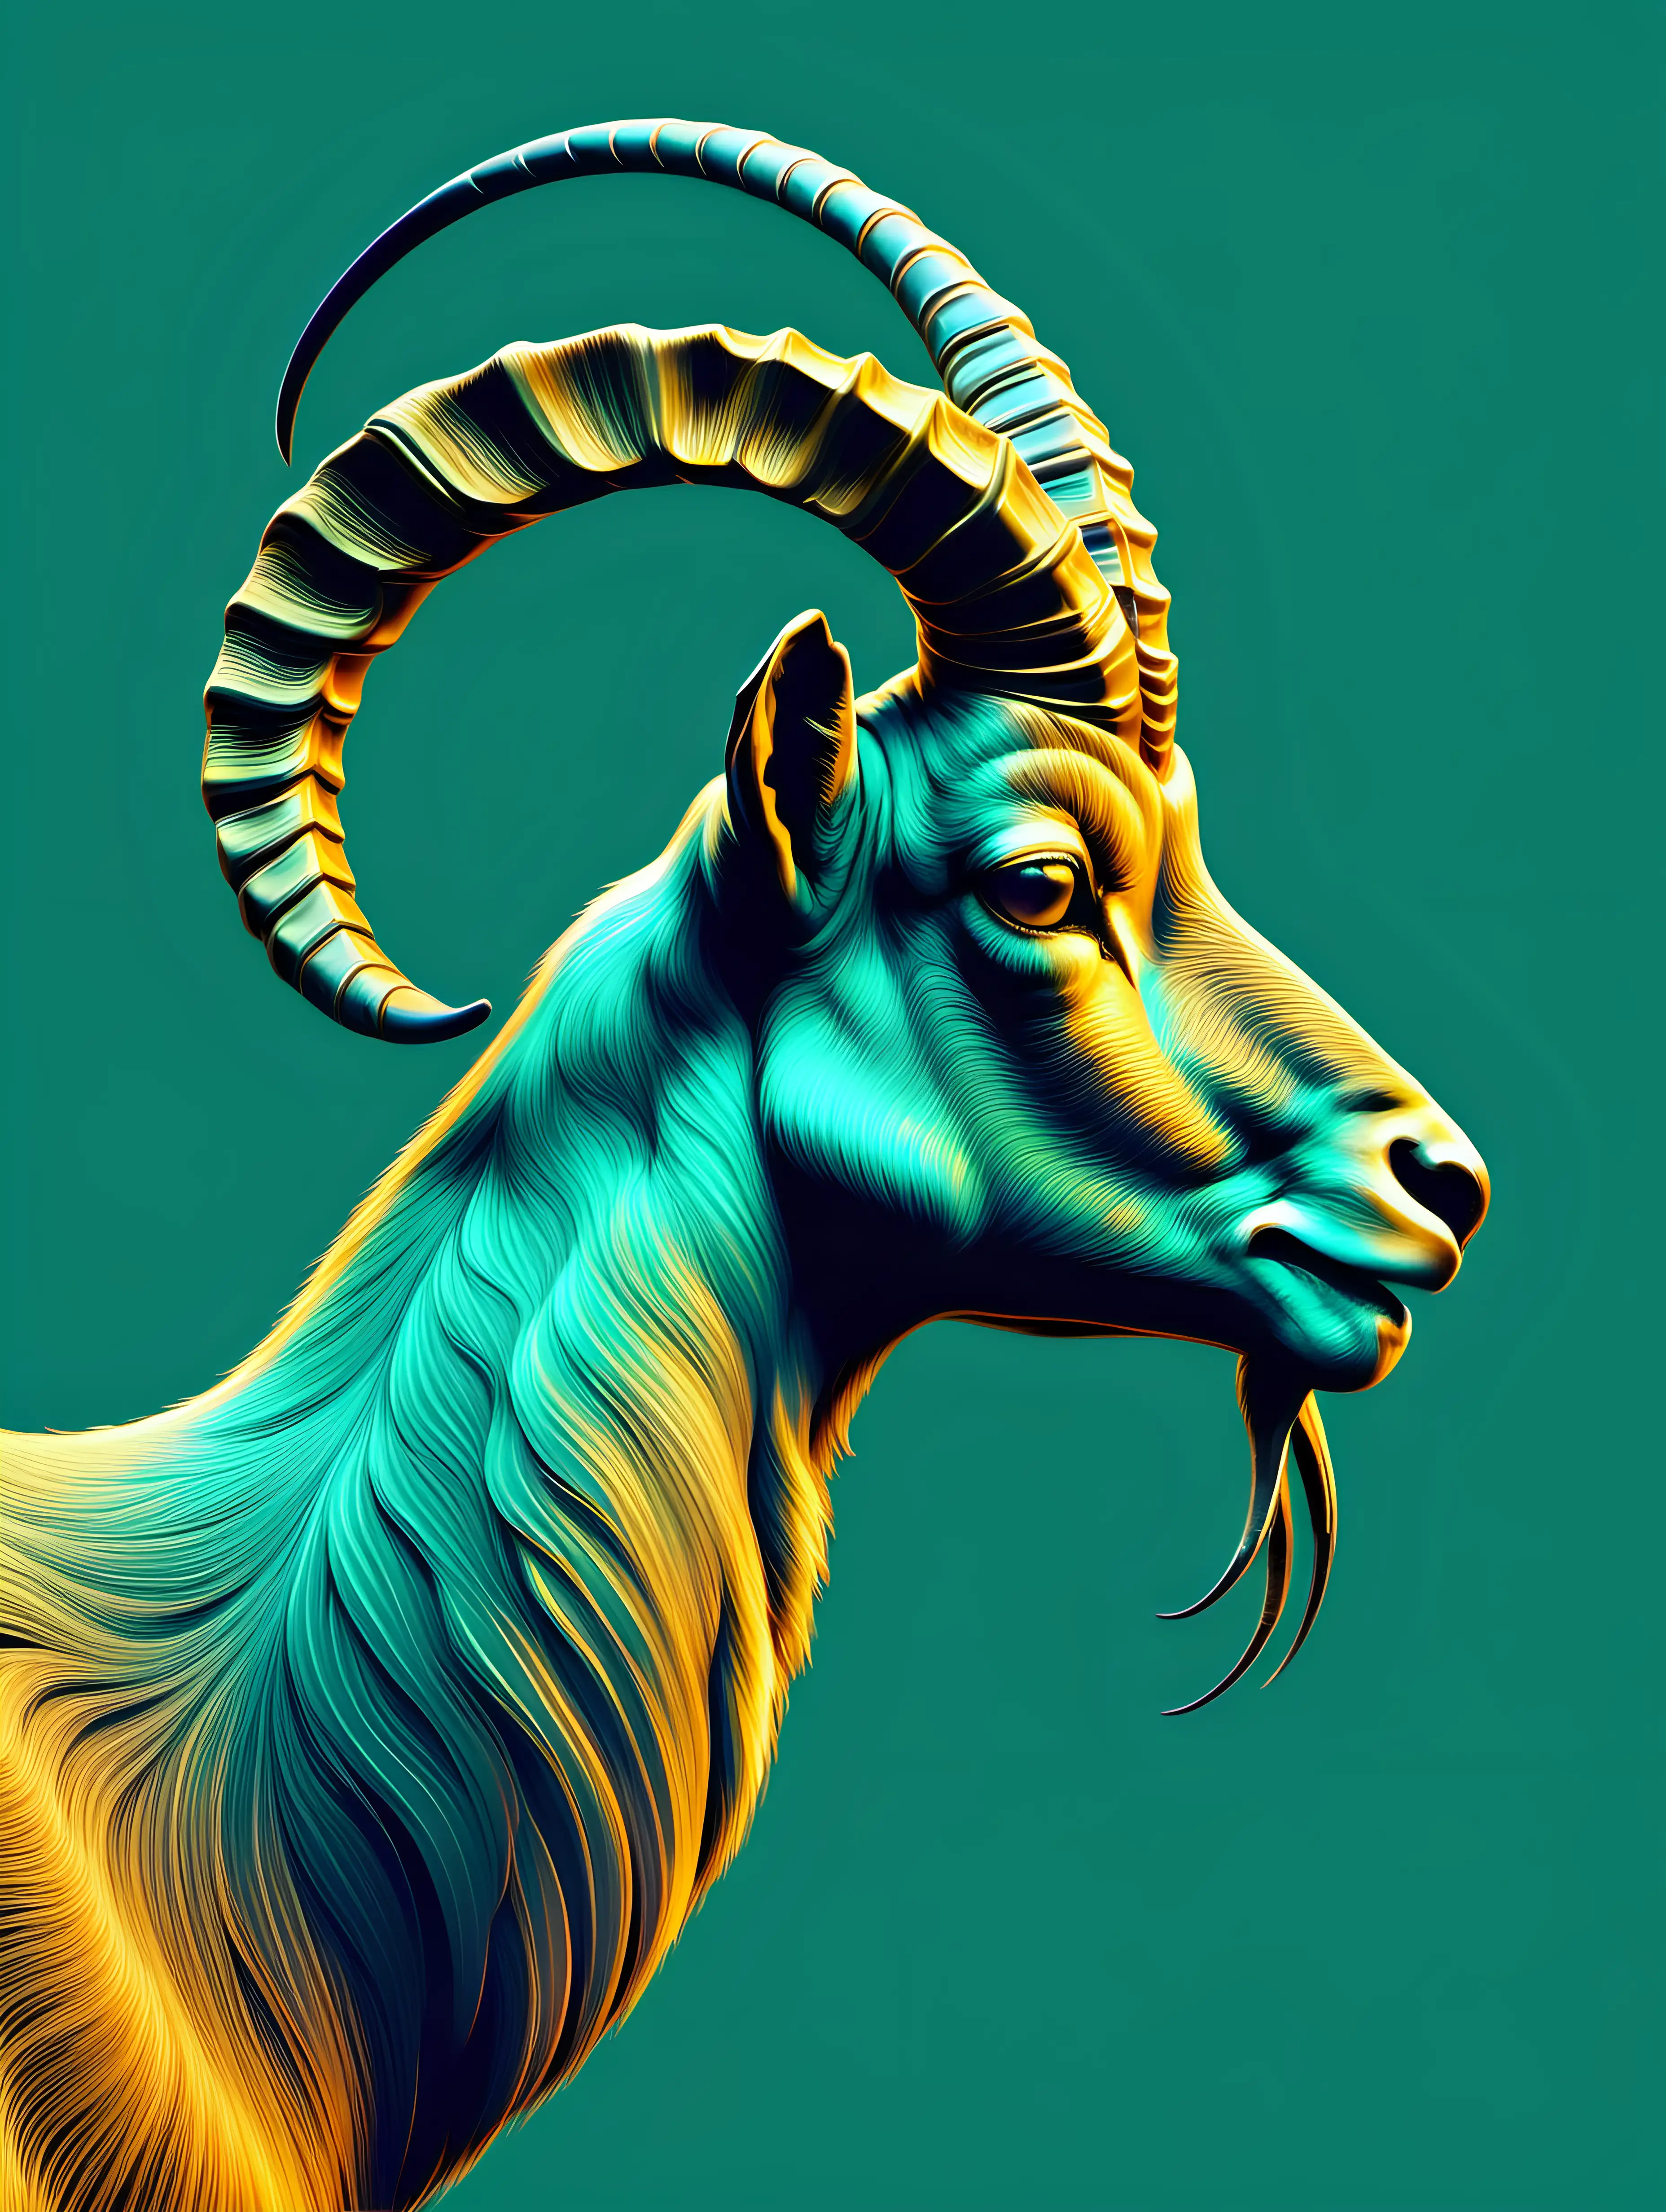 Majestic Golden Ibex Profile on Duck GreenBlue Gradient Background